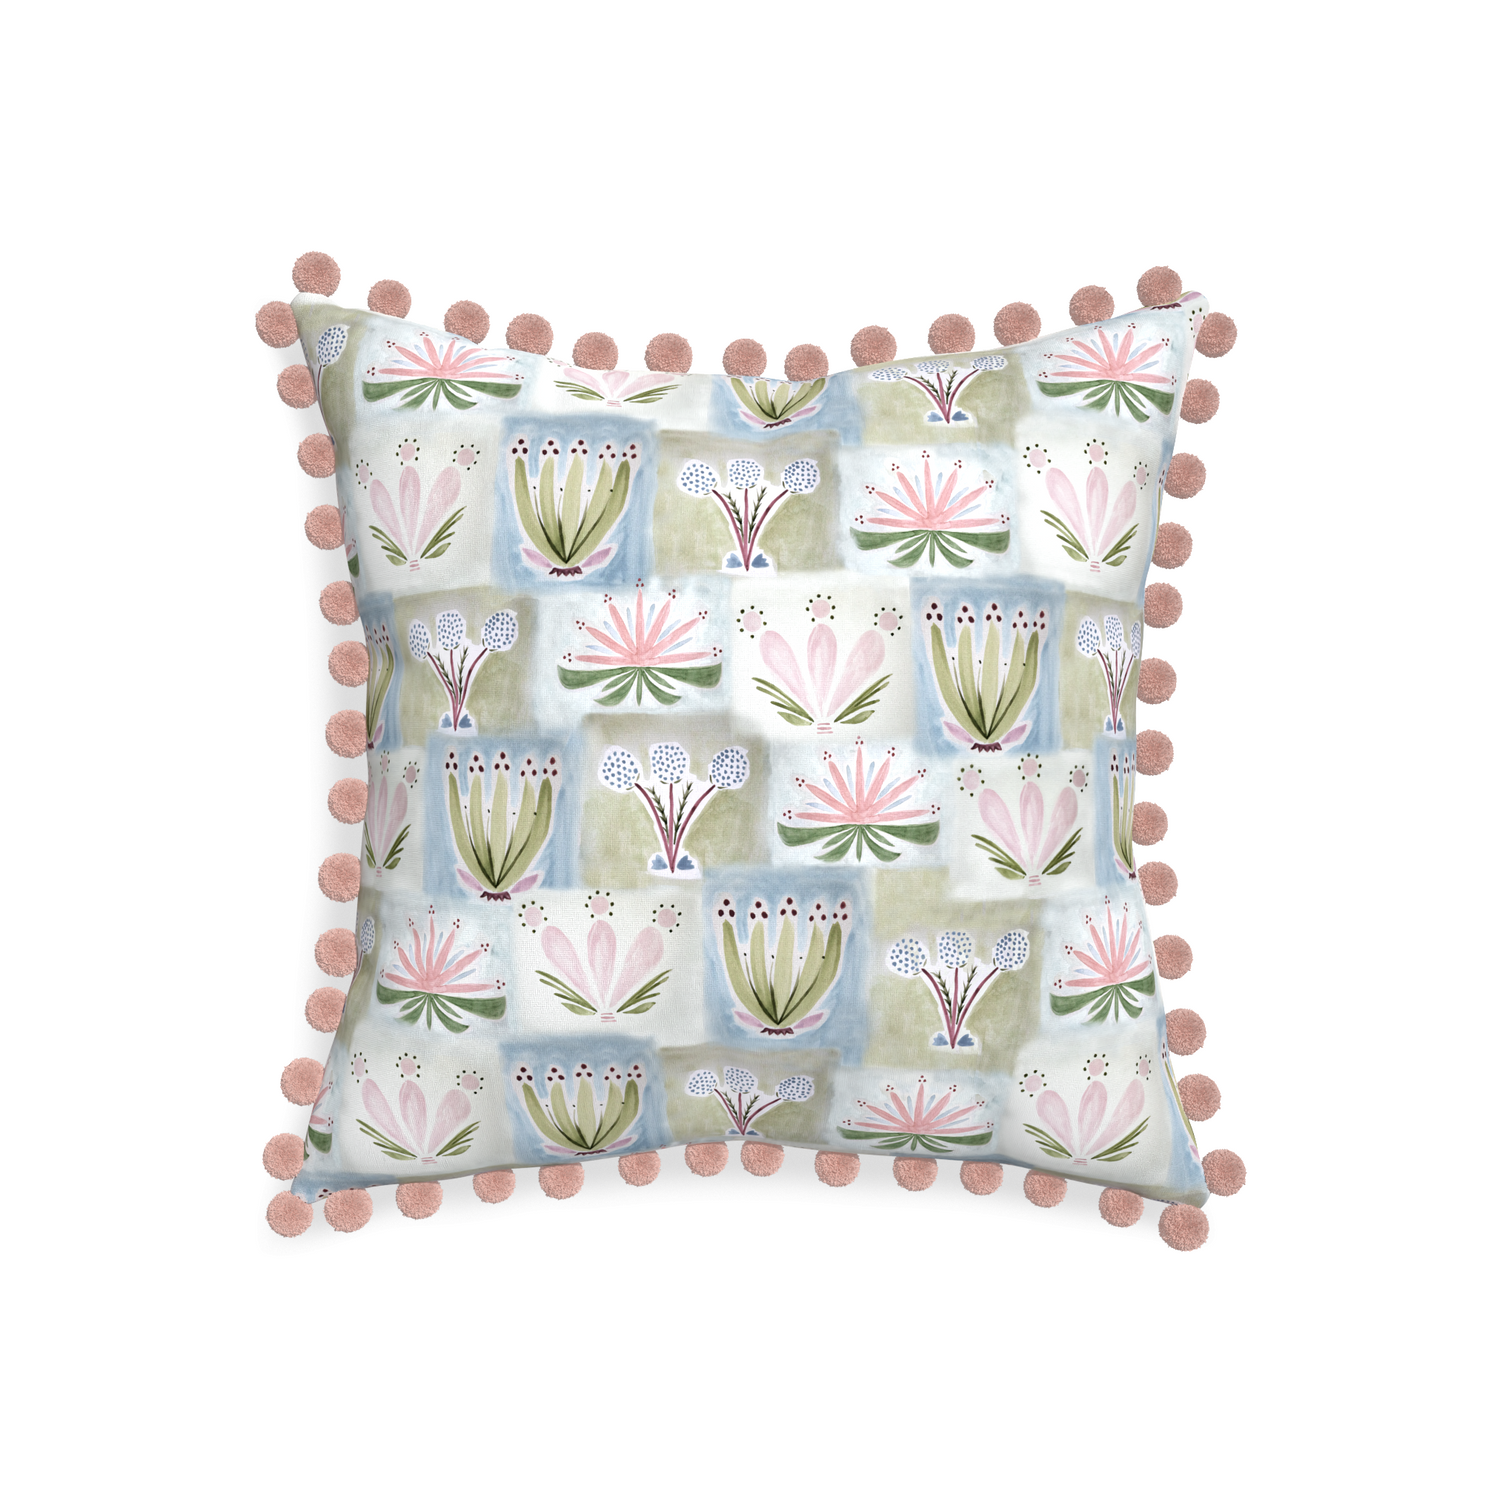 20-square harper custom hand-painted floralpillow with rose pom pom on white background